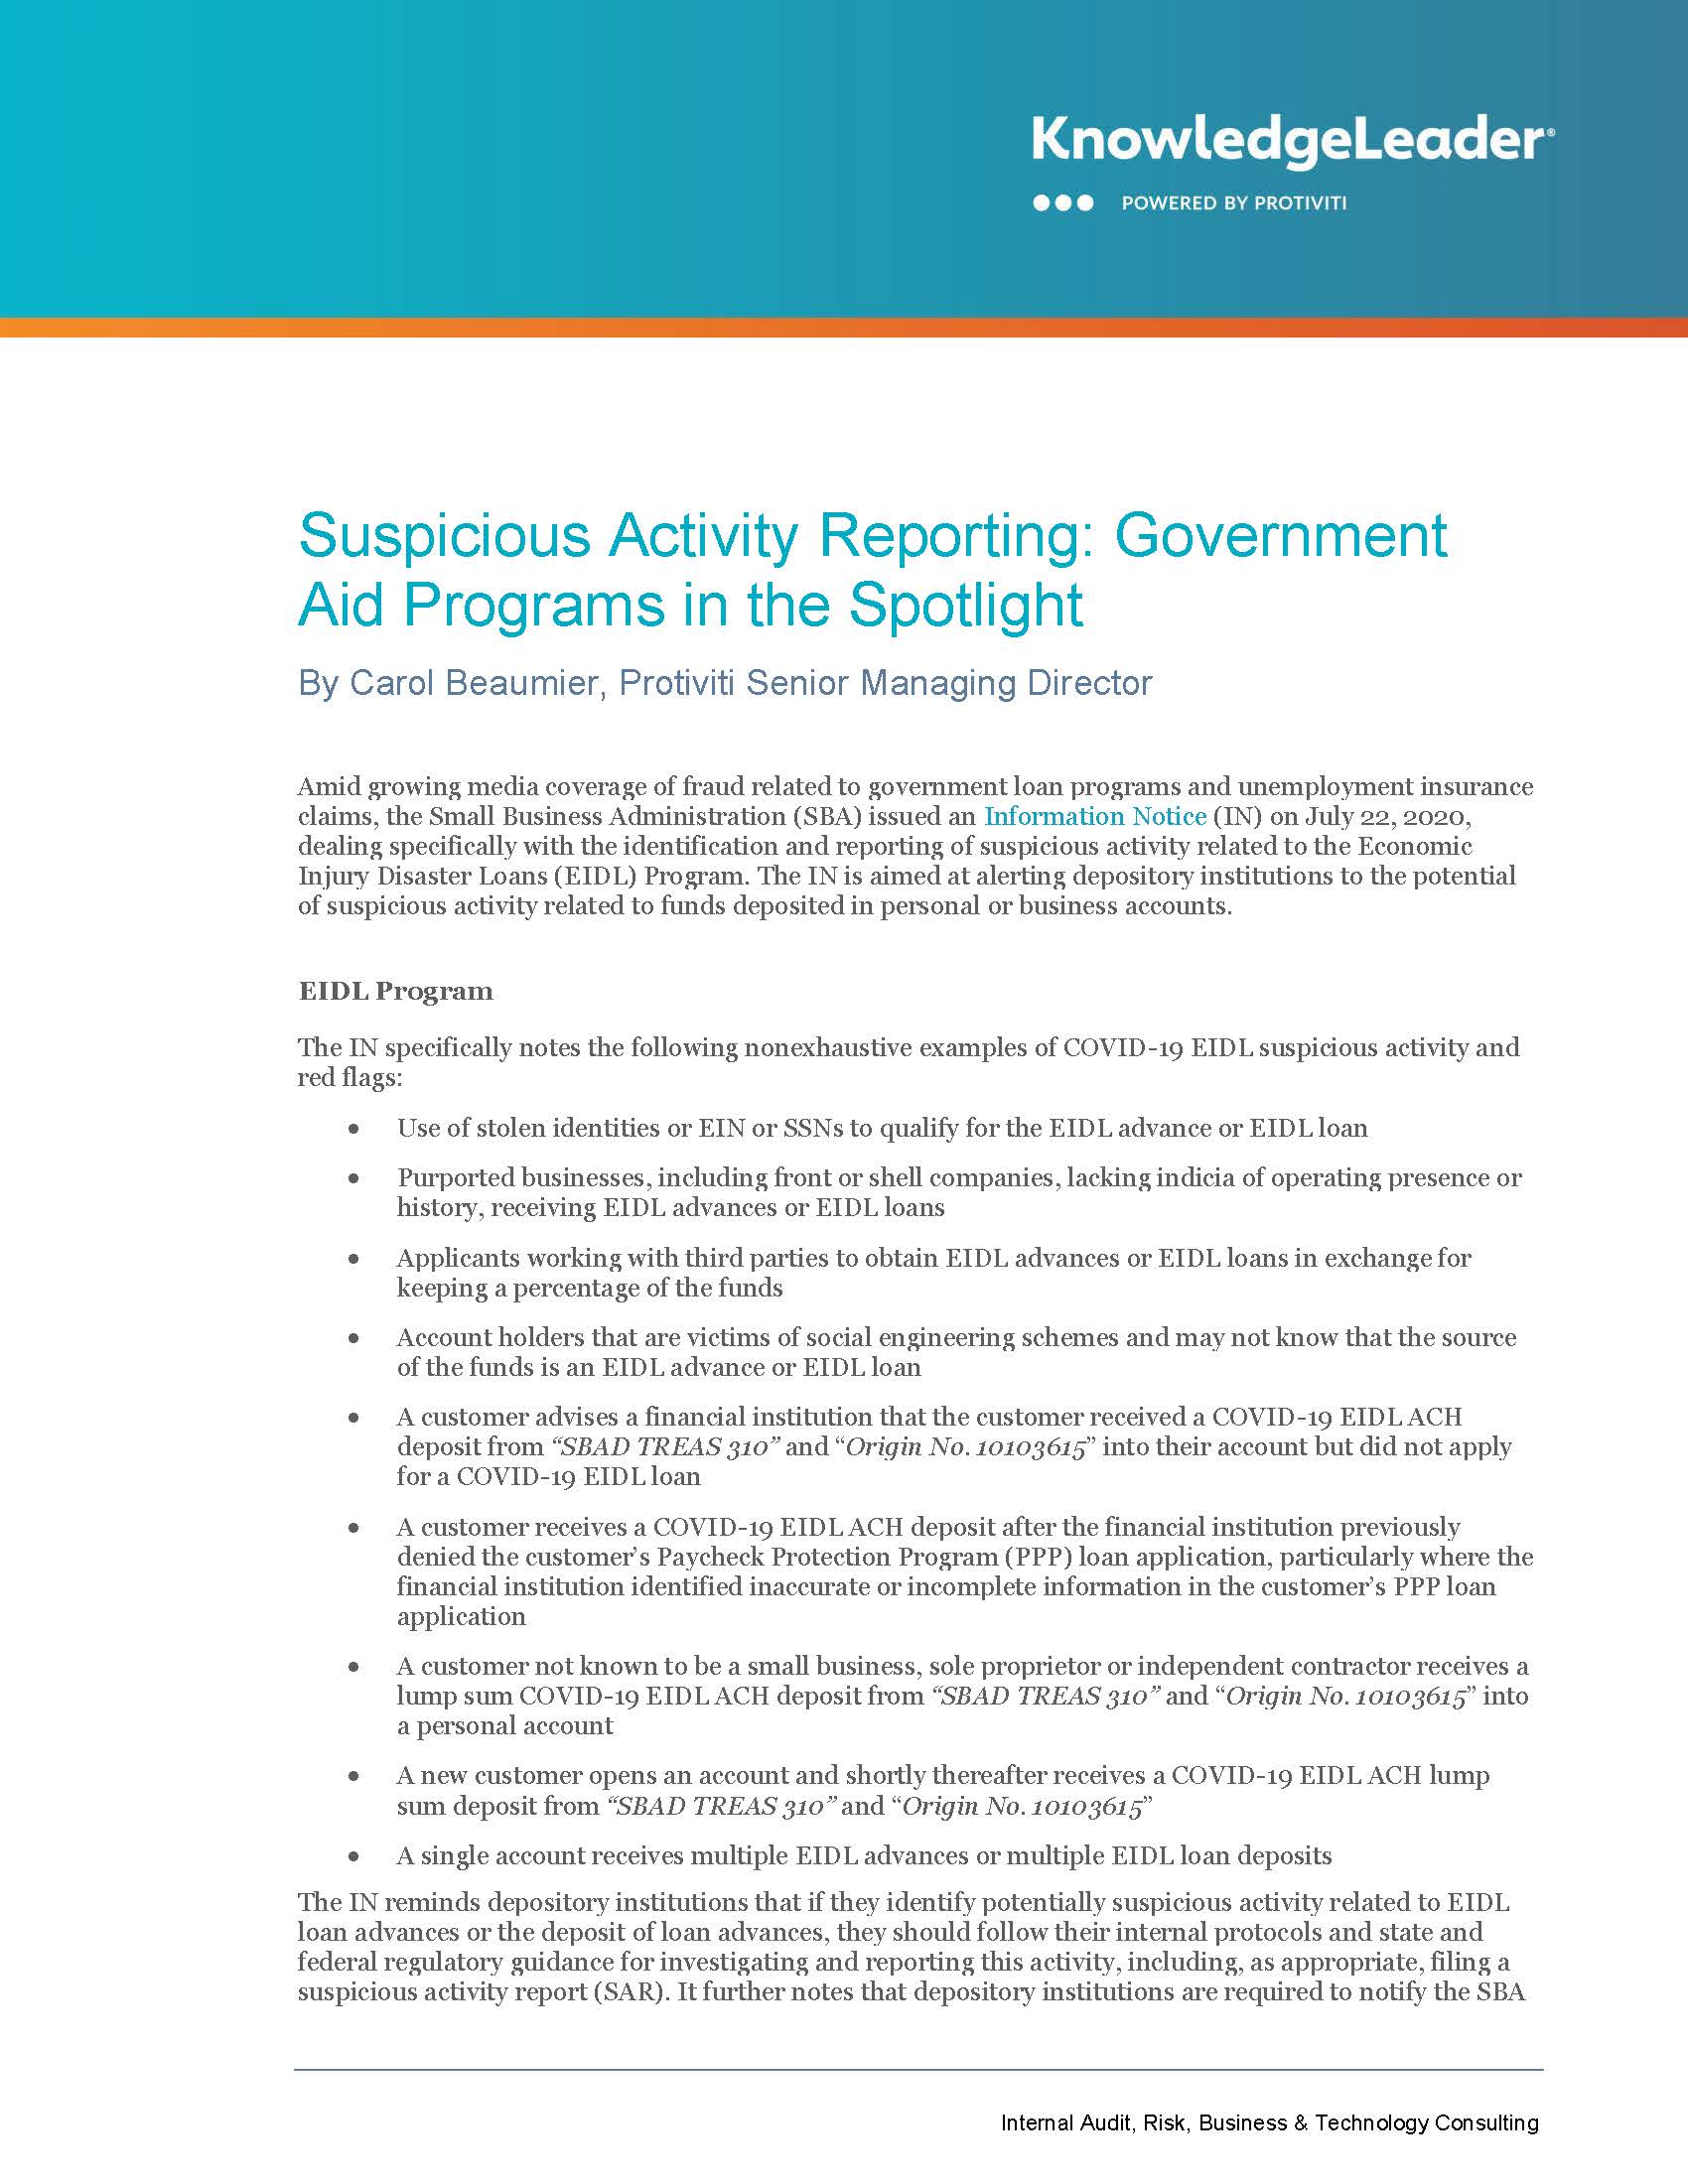 Screenshot of the first page of Suspicious Activity Reporting Government Aid Programs in the Spotlight